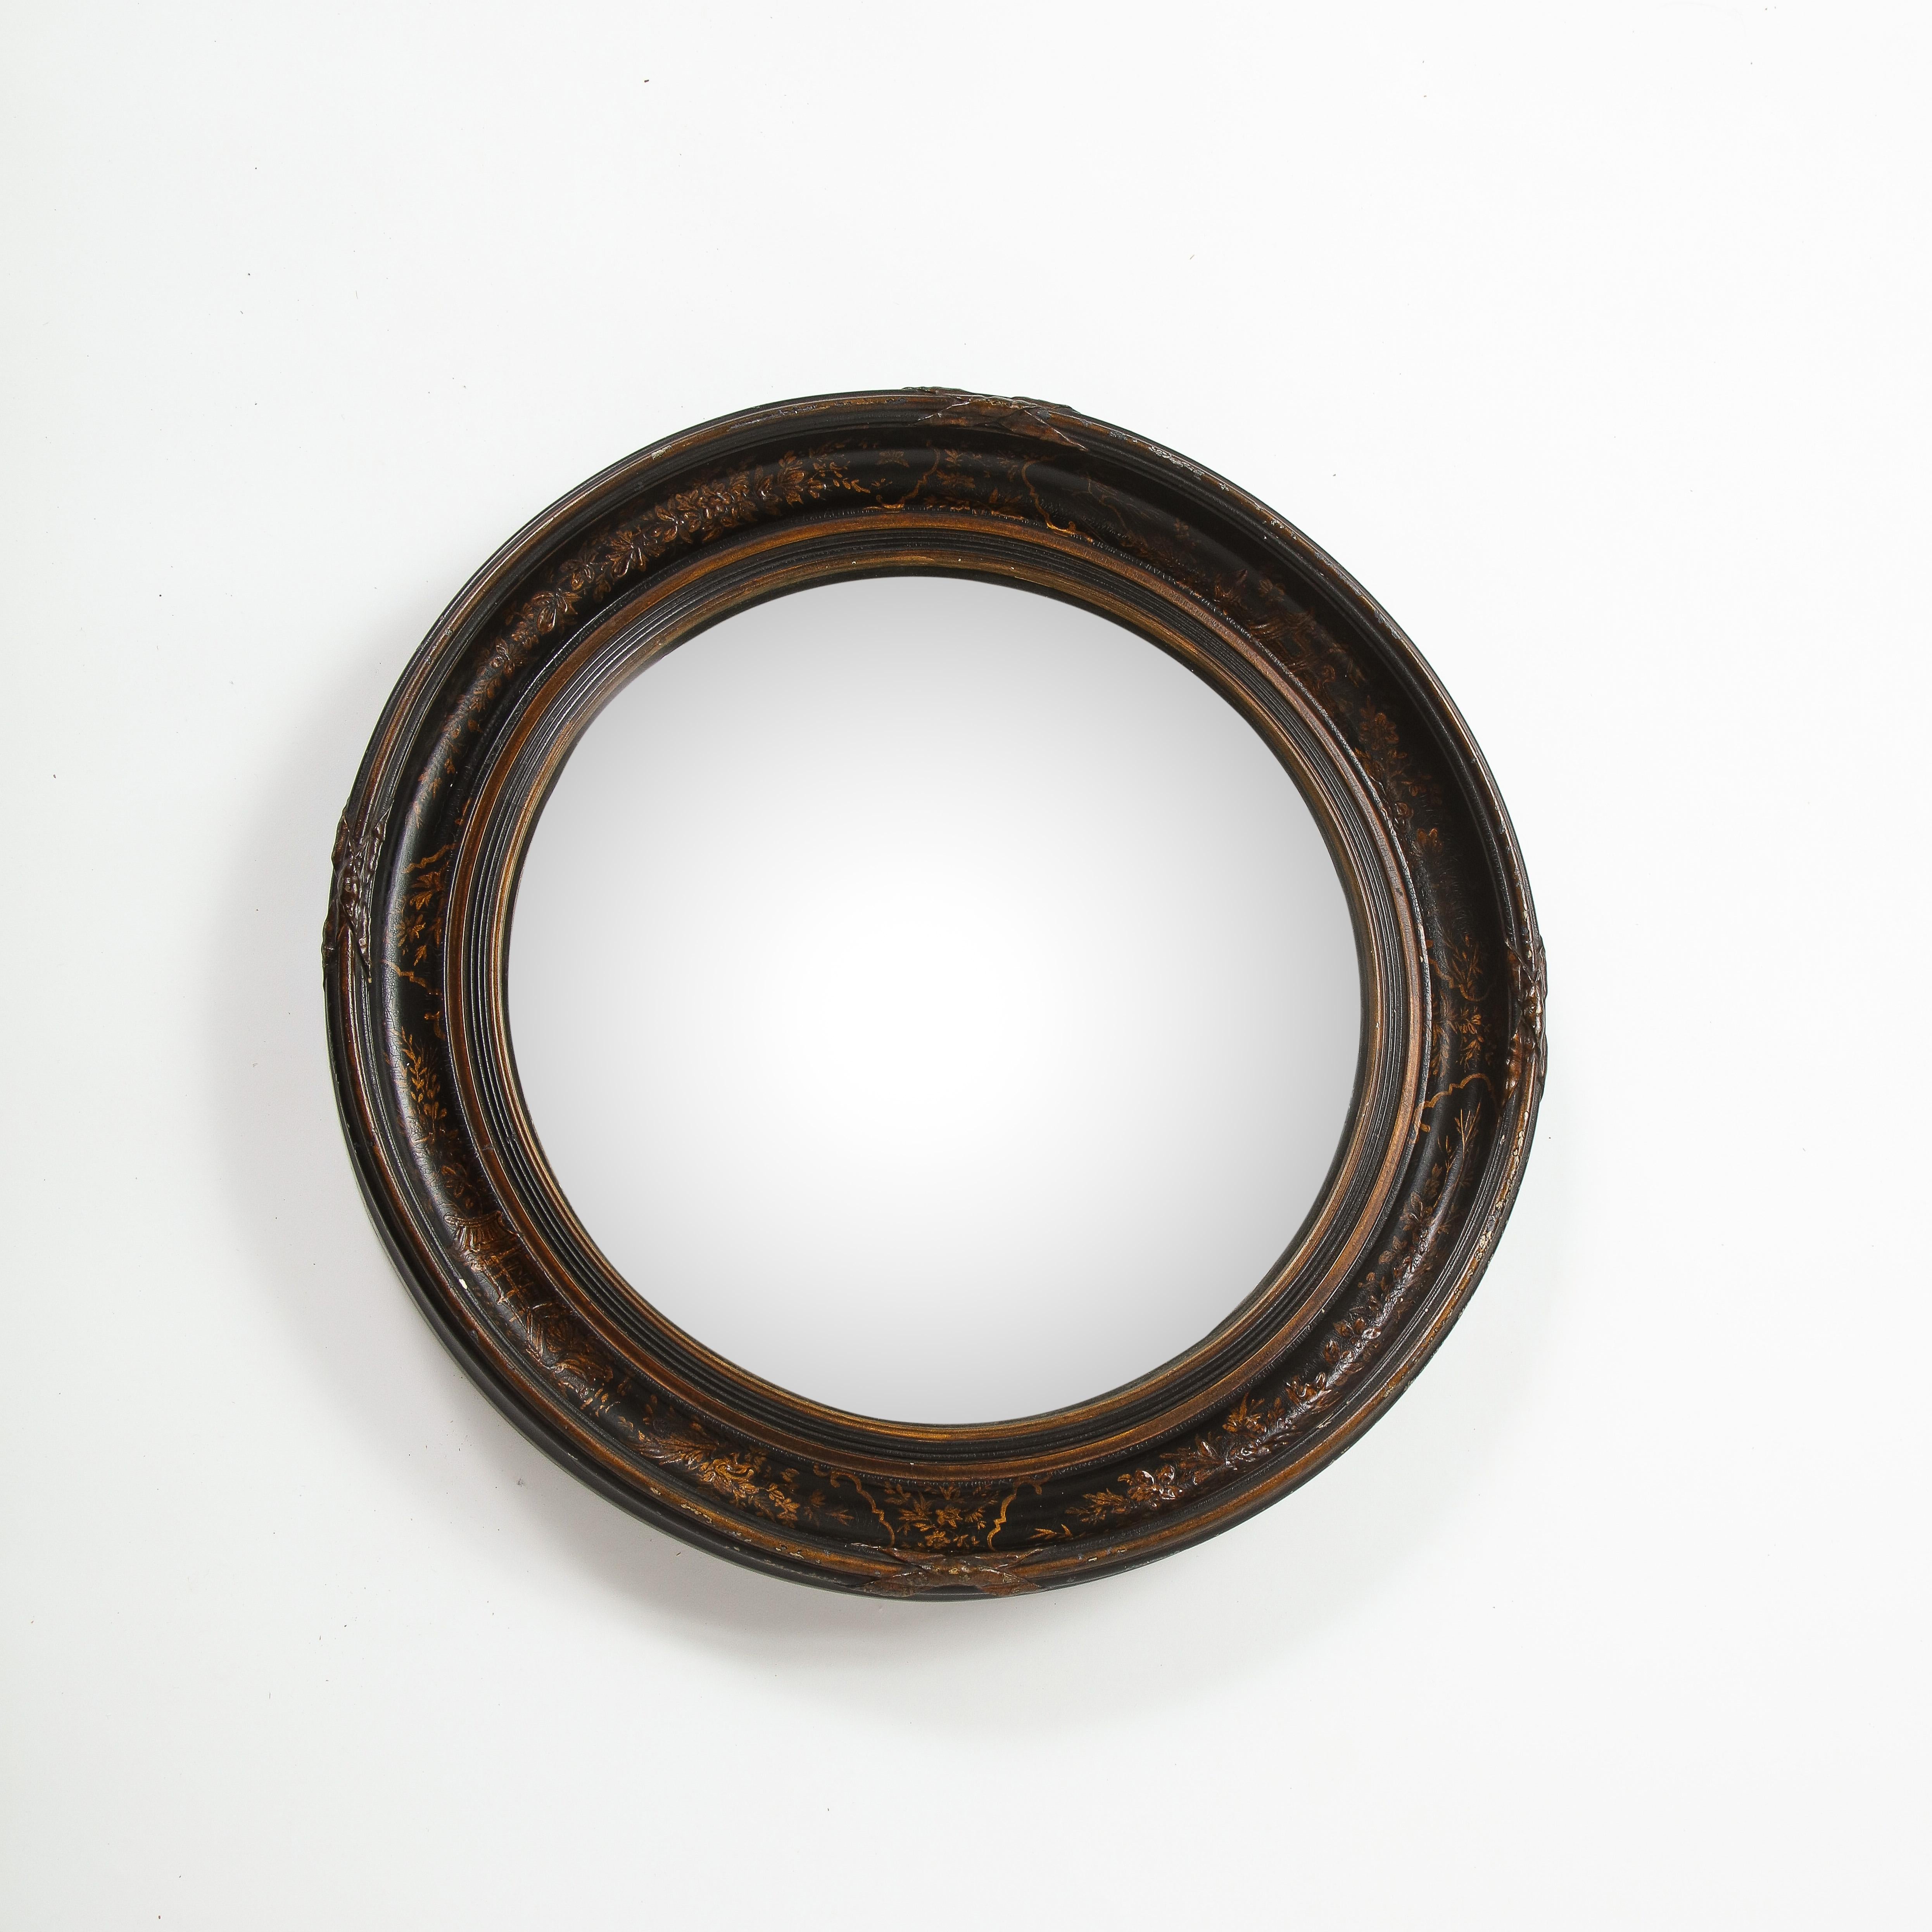 The round mirror plate within a reeded ebonized slip and channeled surround with chinoiserie japanned decoration on a black ground; the outer edge enriched with fasces ornament.